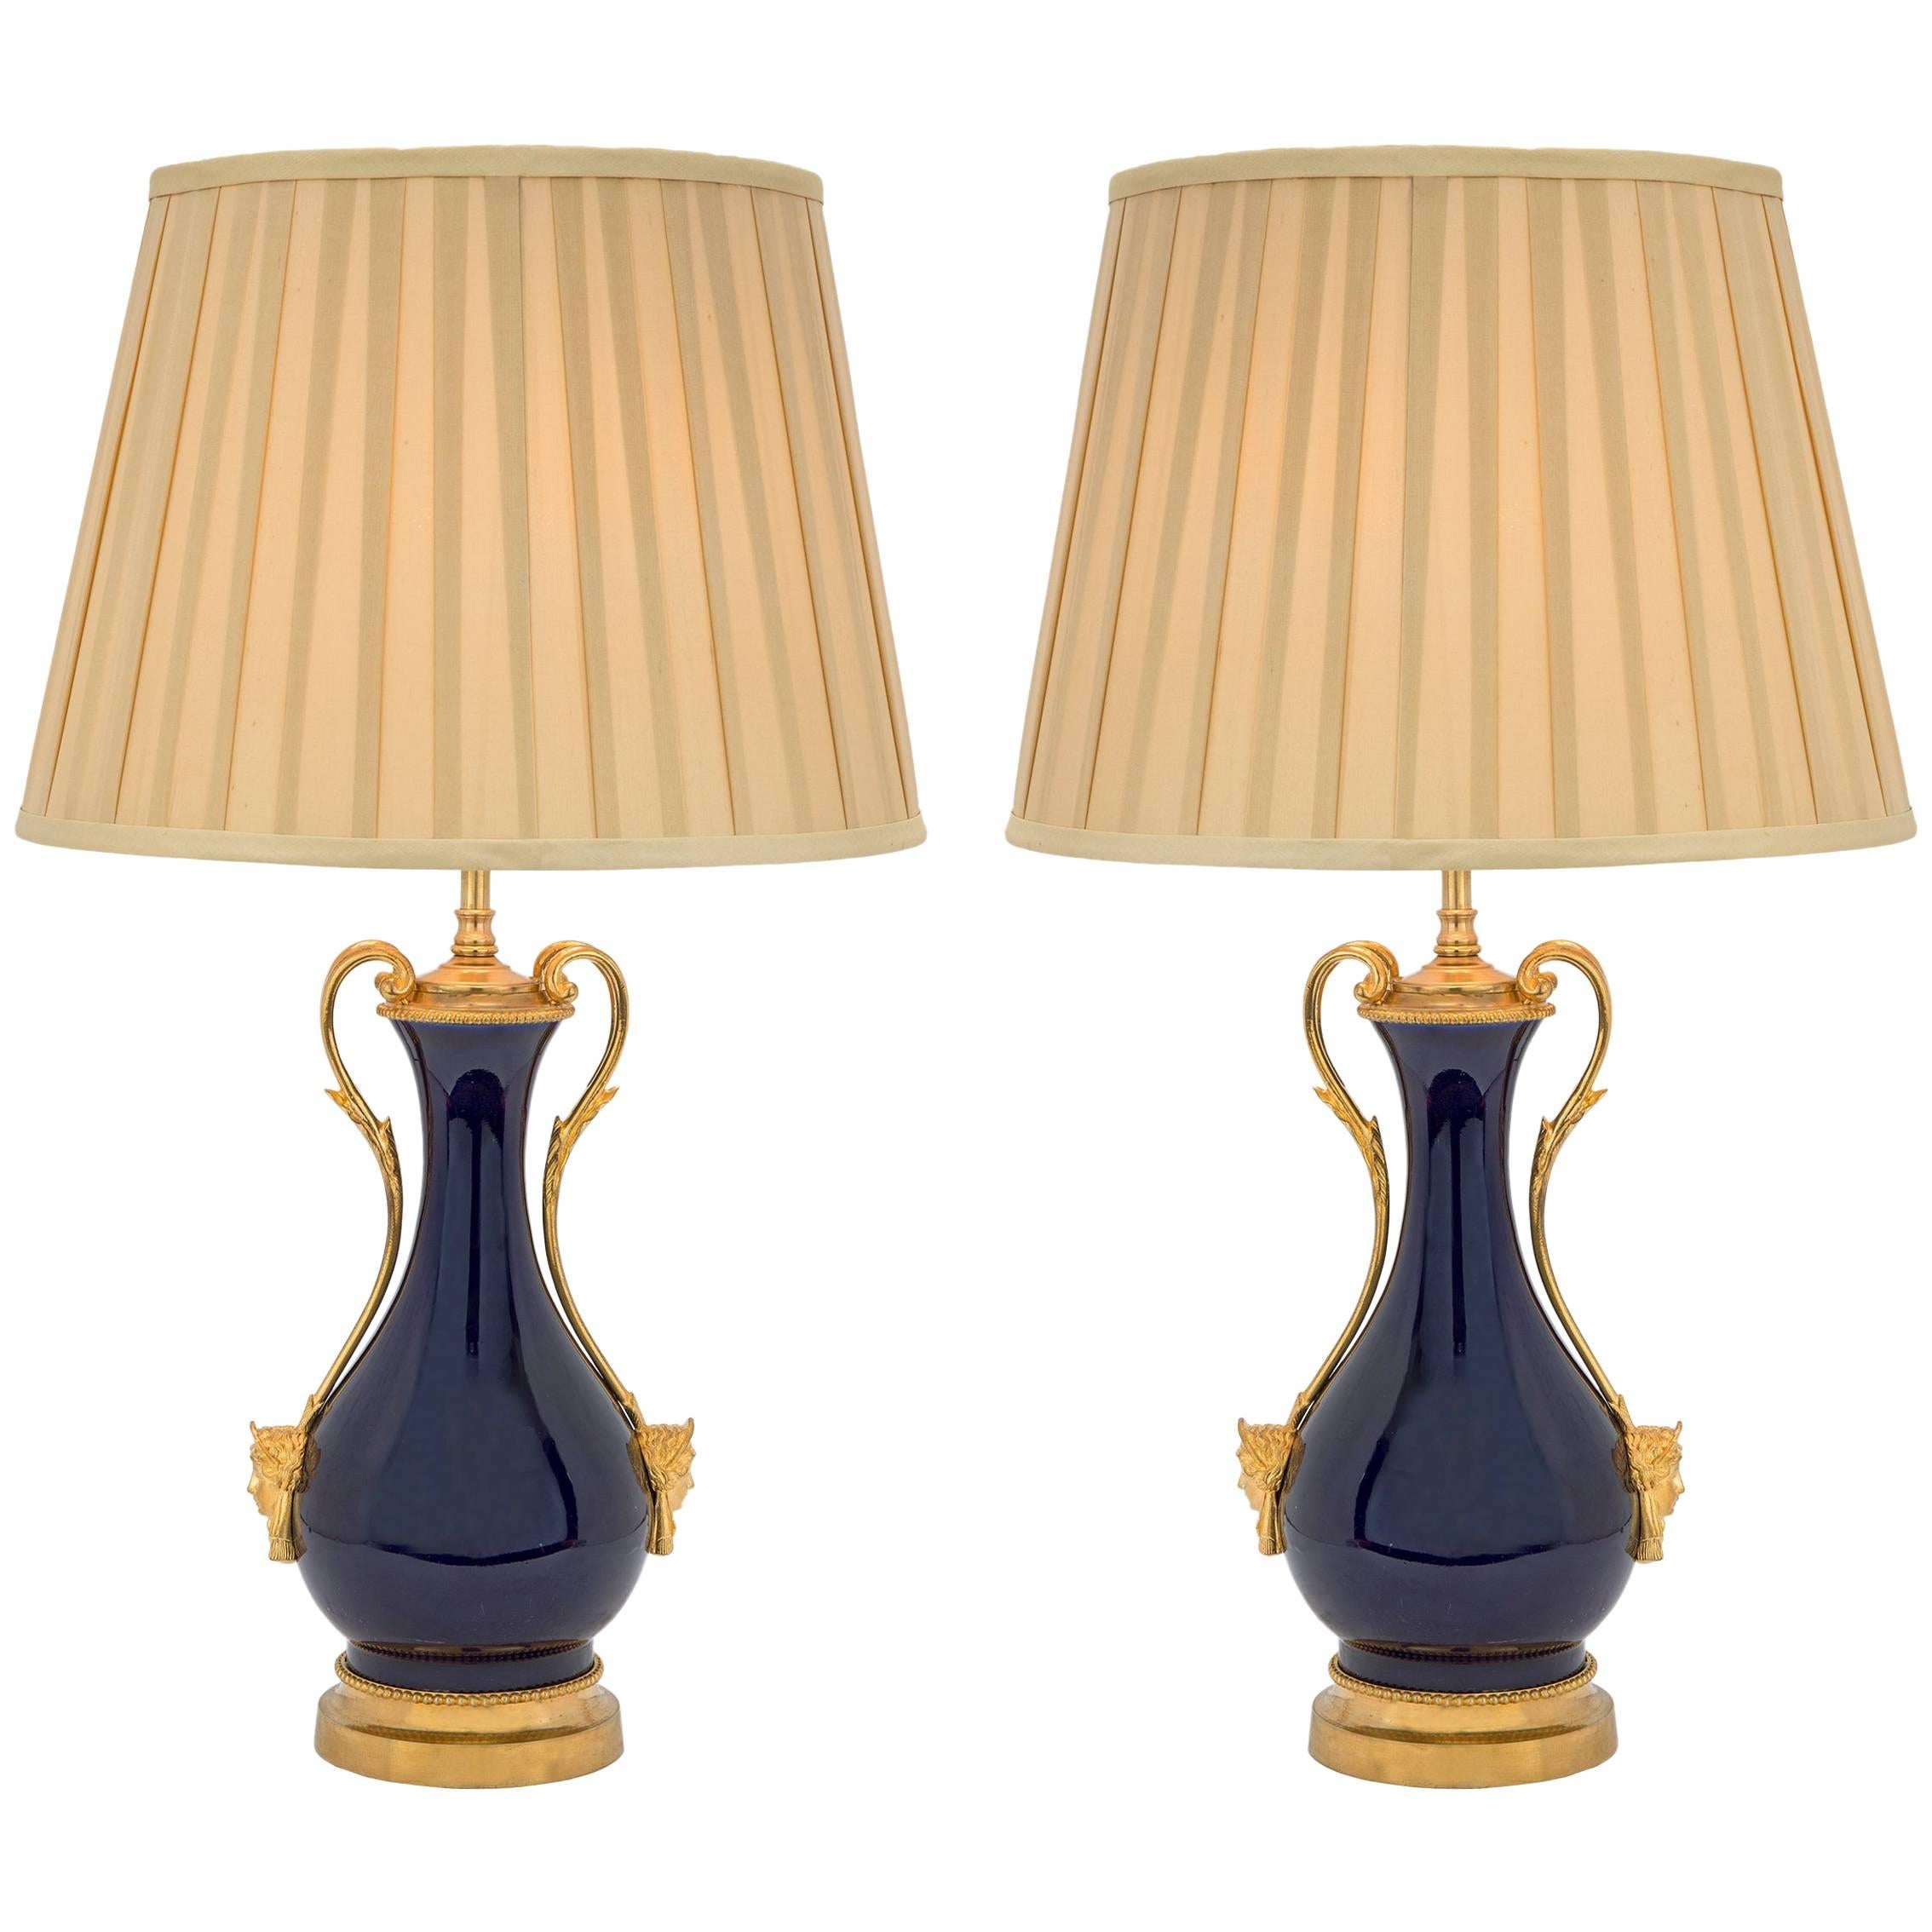 Pair of French Louis XVI Style Cobalt Blue Sèvres Porcelain and Ormolu Lamps